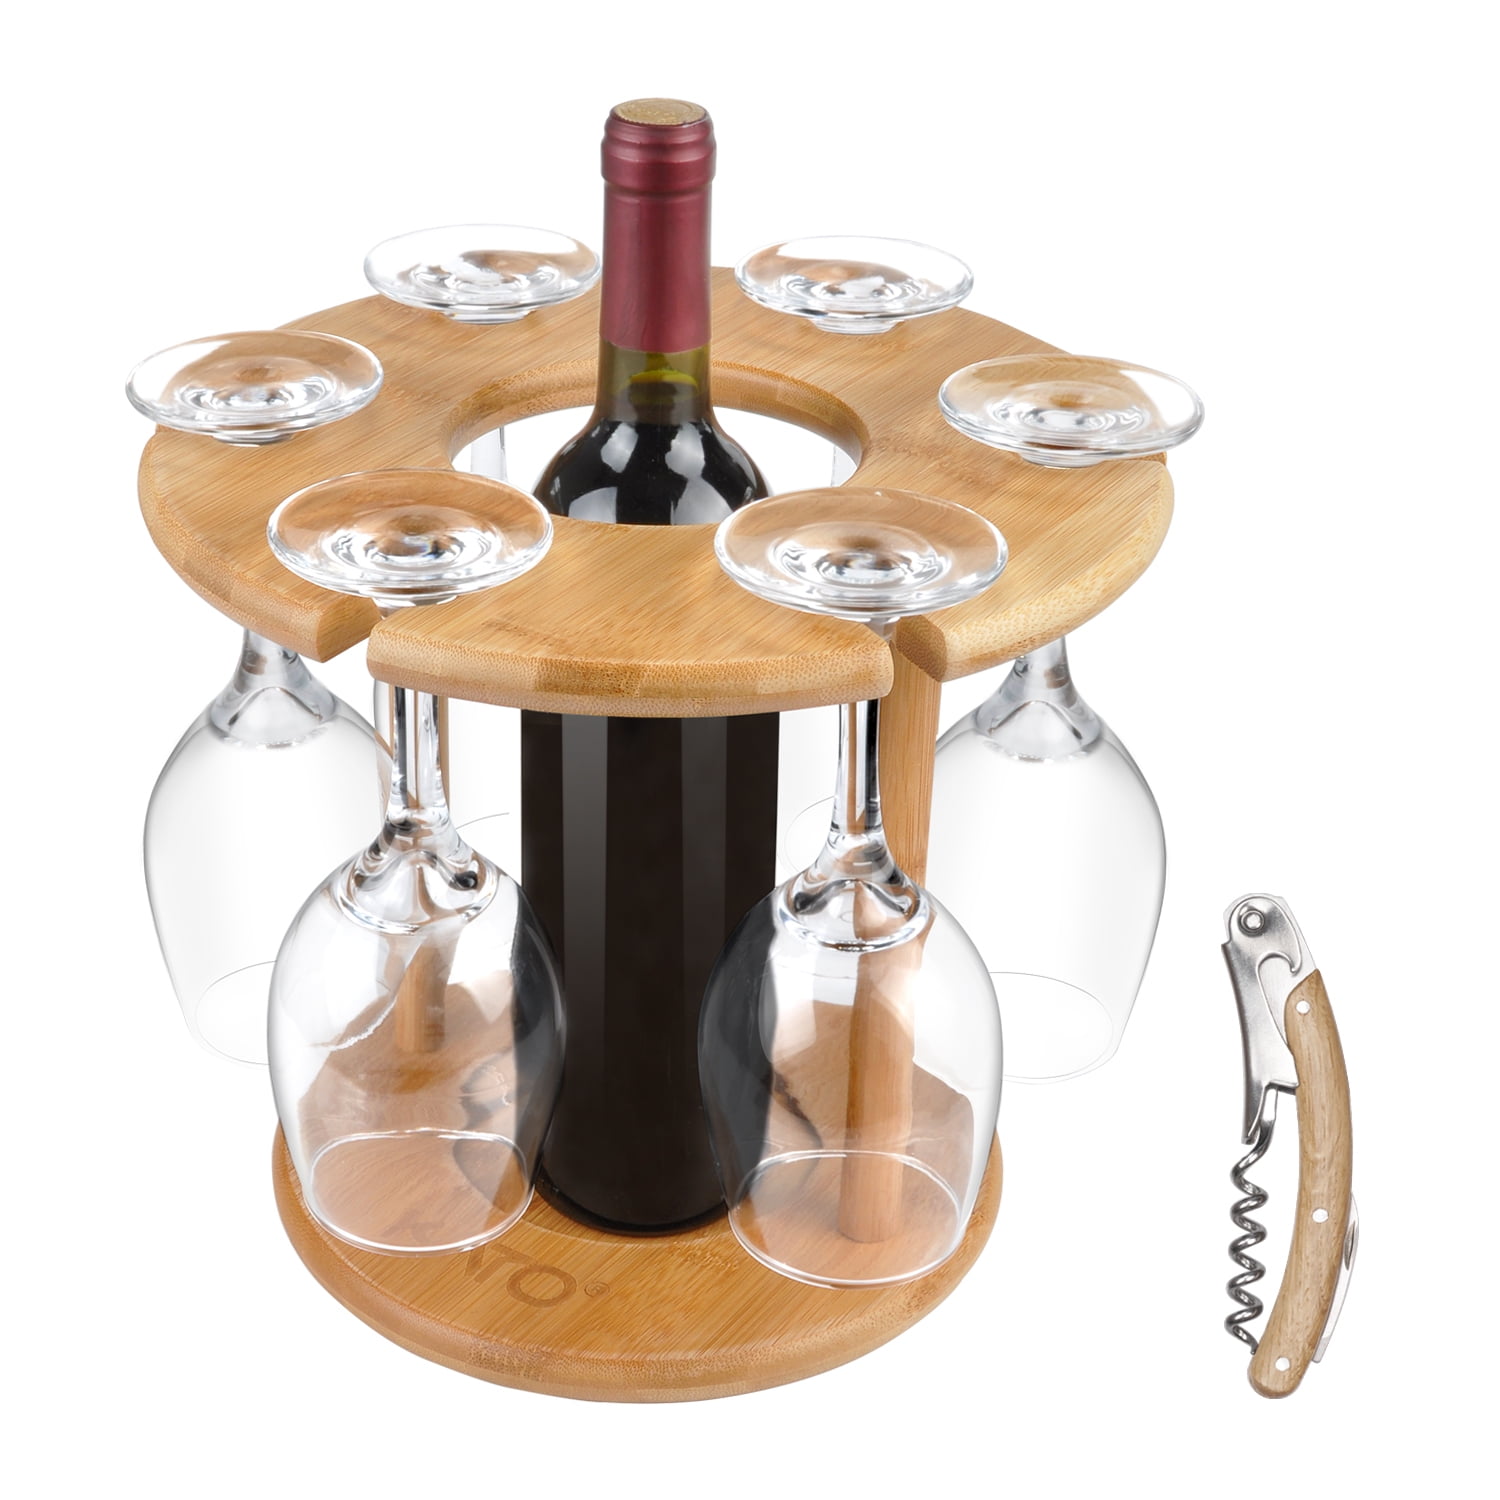 Wine Glass Hanging Drying Stand Organizer on Countertop Tabletop with Free Corkscrew Bamboo Kato Wine 2 Bottle Holder & 4 Glass Rack 